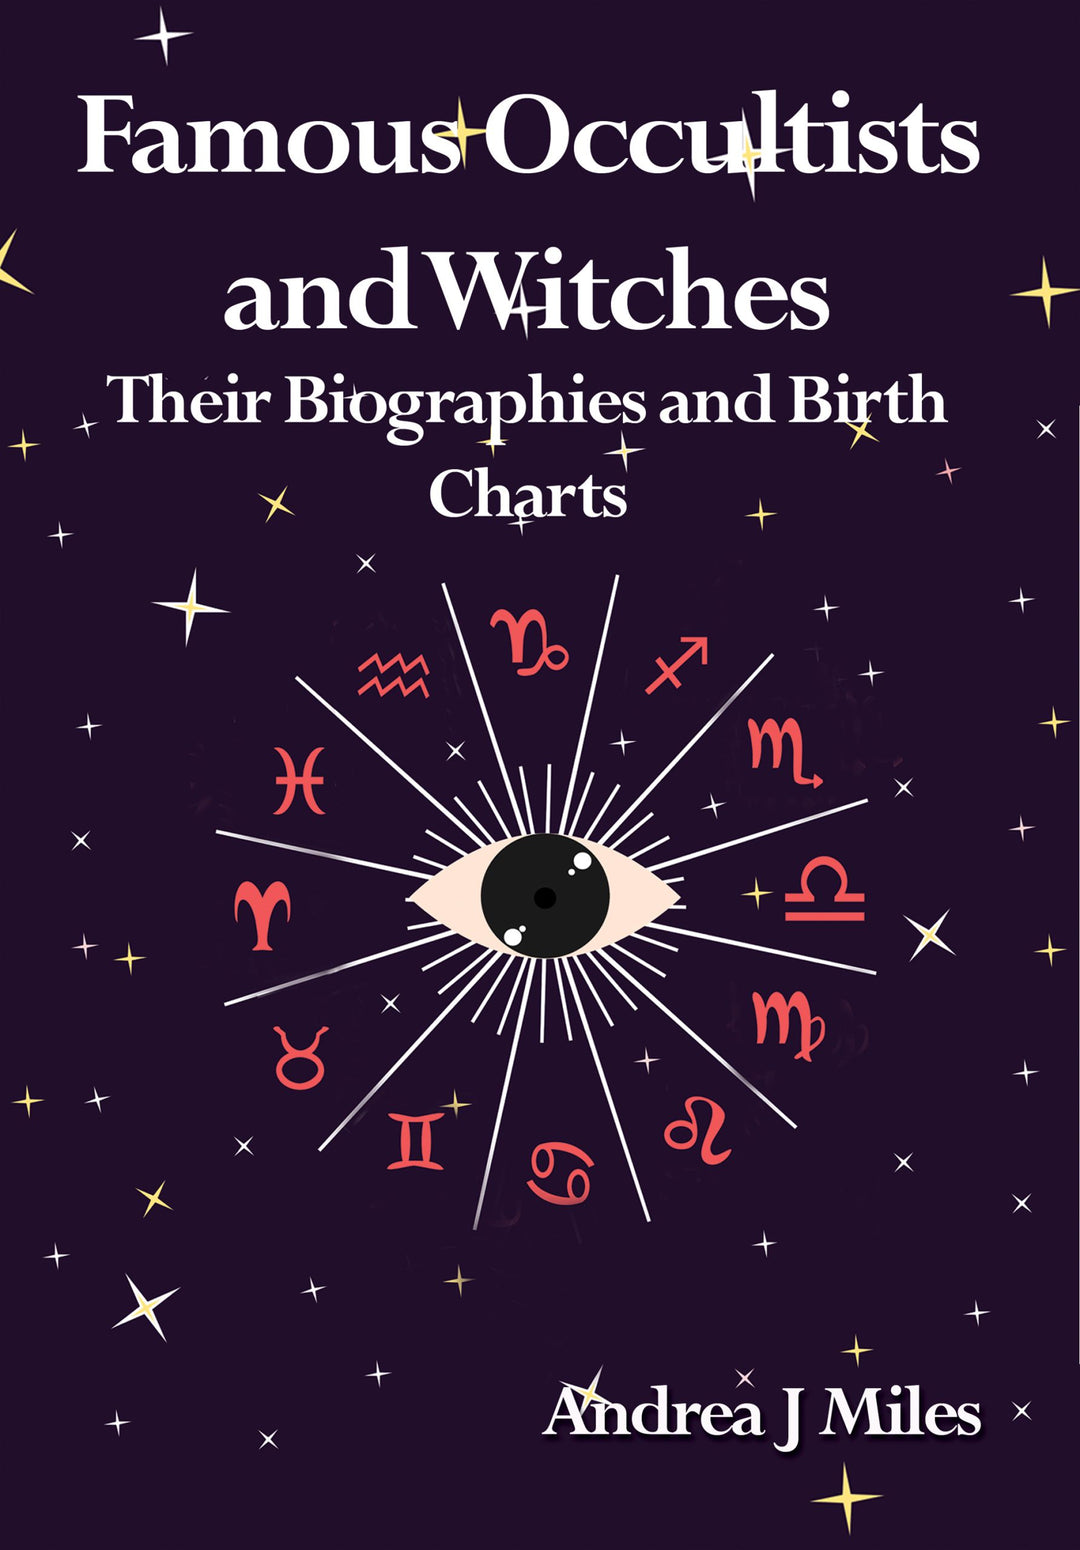 Famous Occultists and Witches (Andrea J Miles)